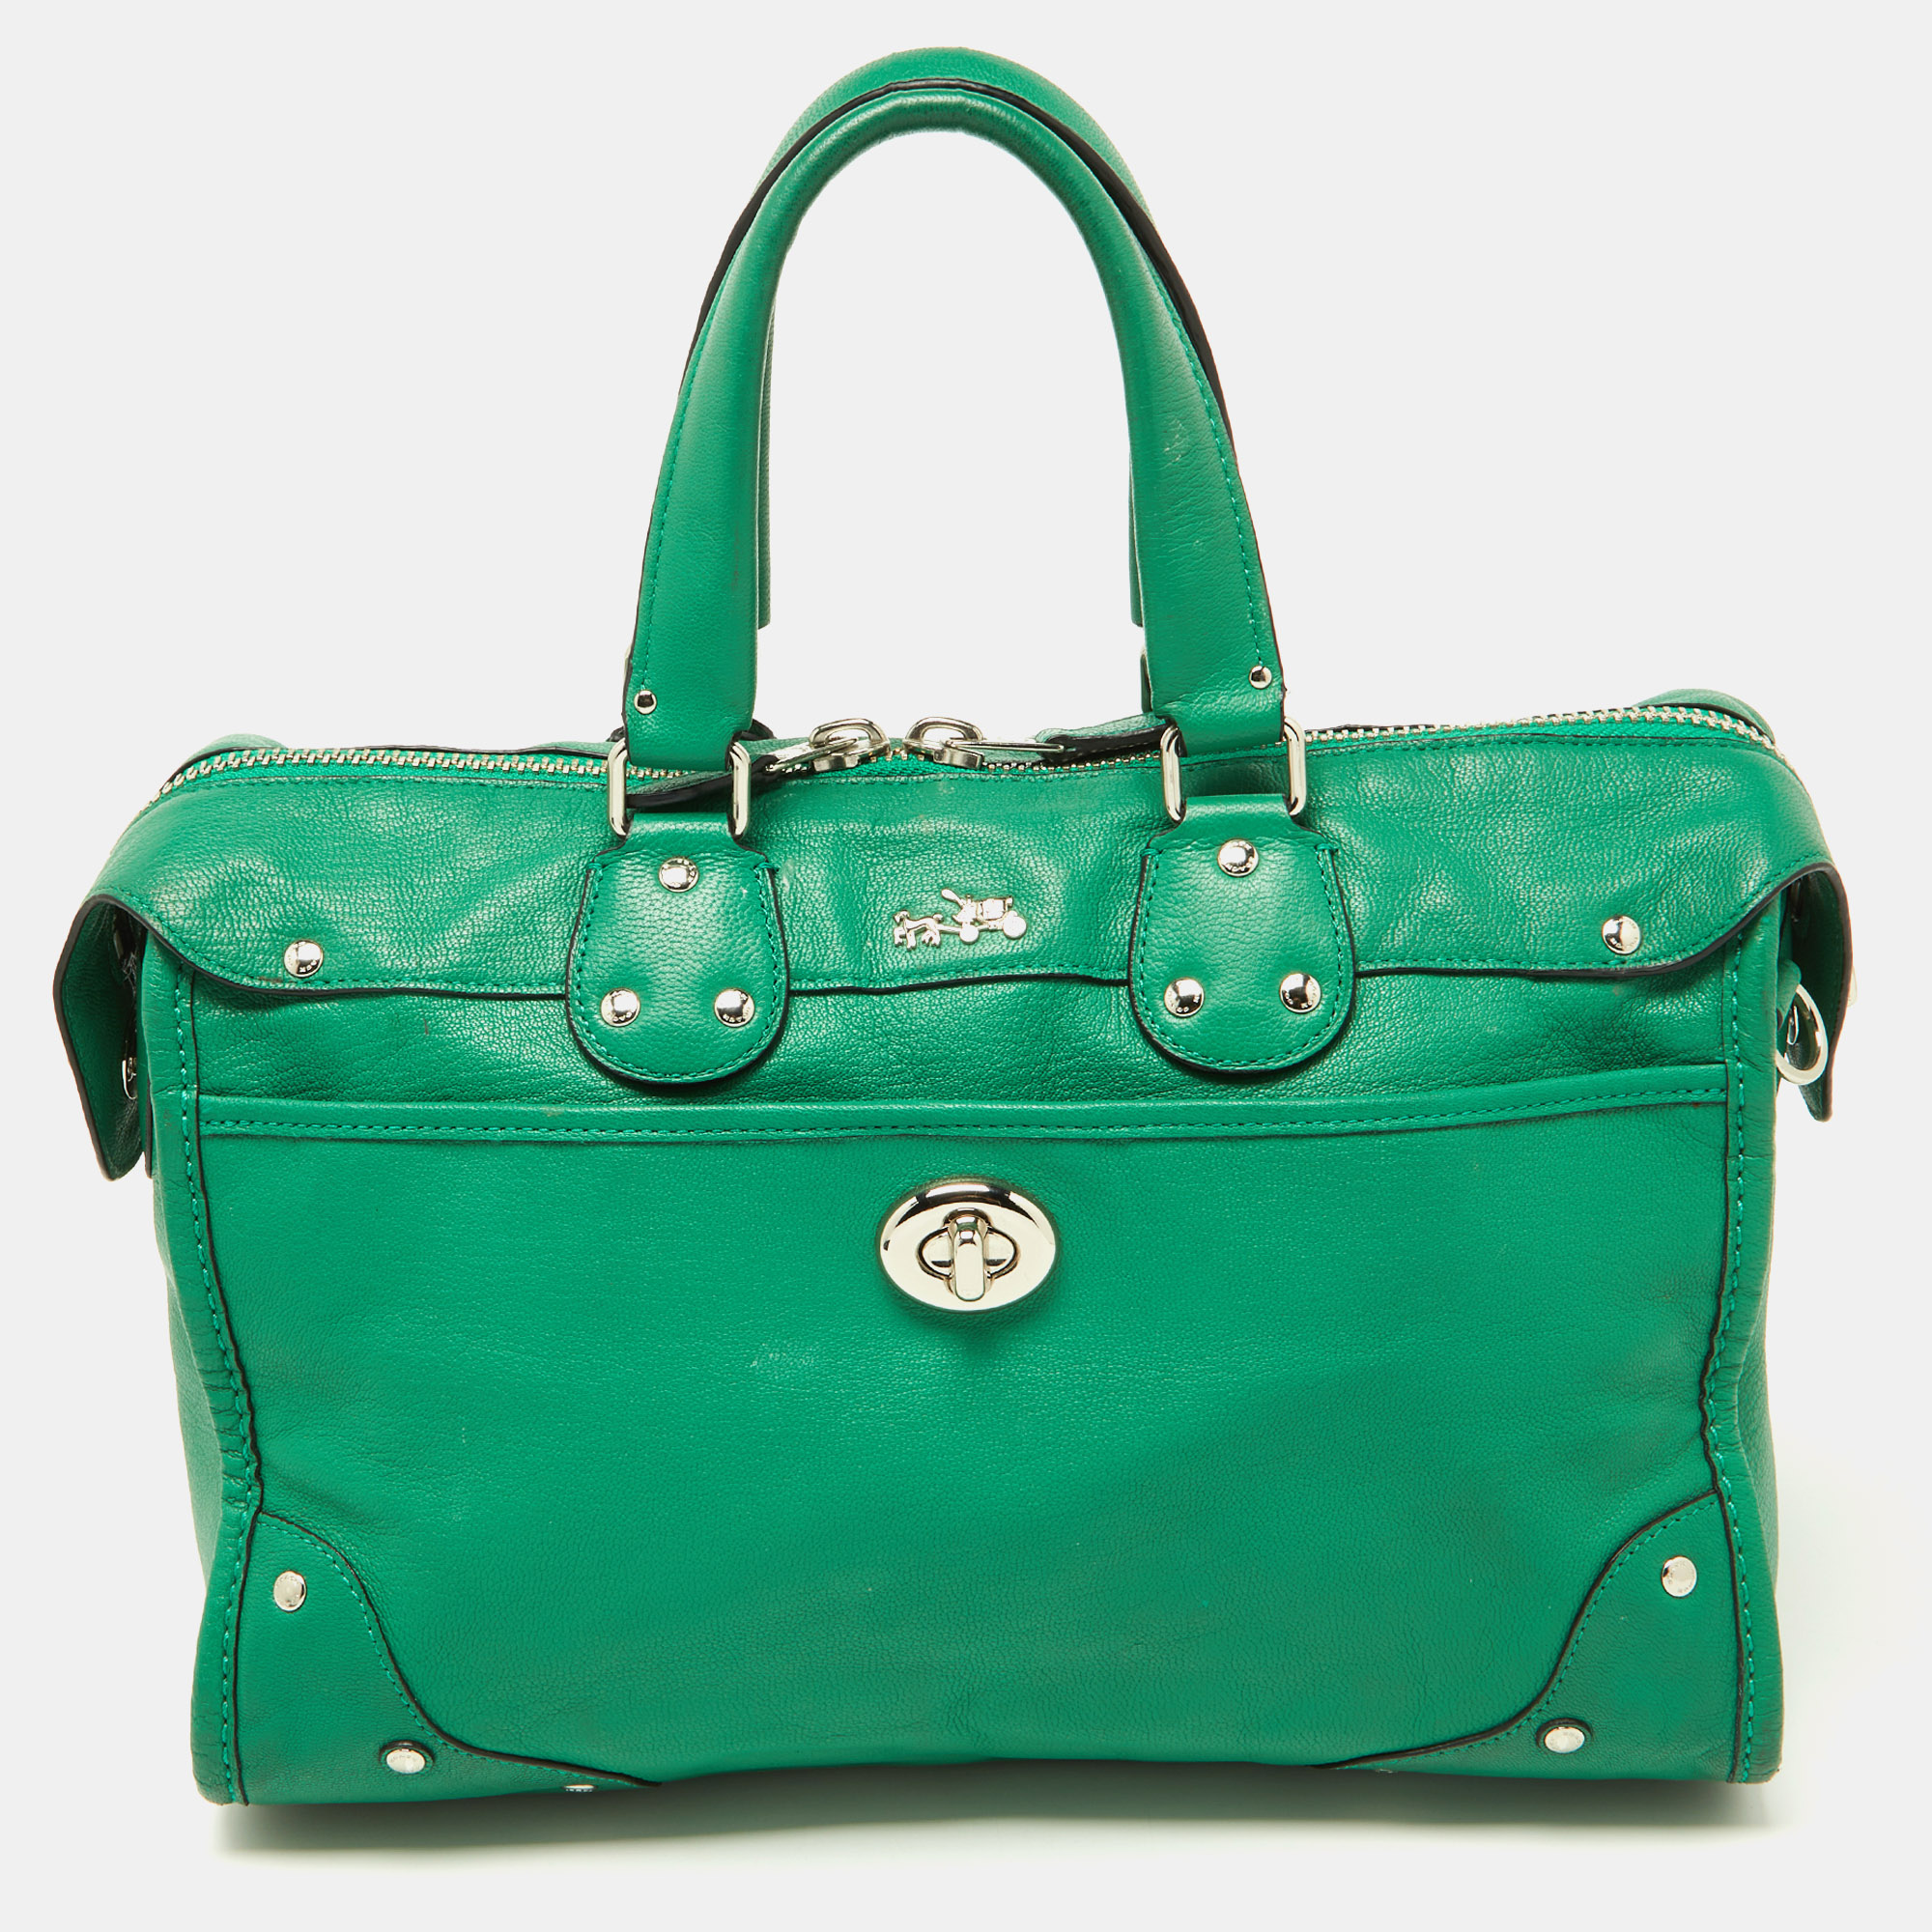 Pre-owned Coach Green Leather Rhyder Satchel